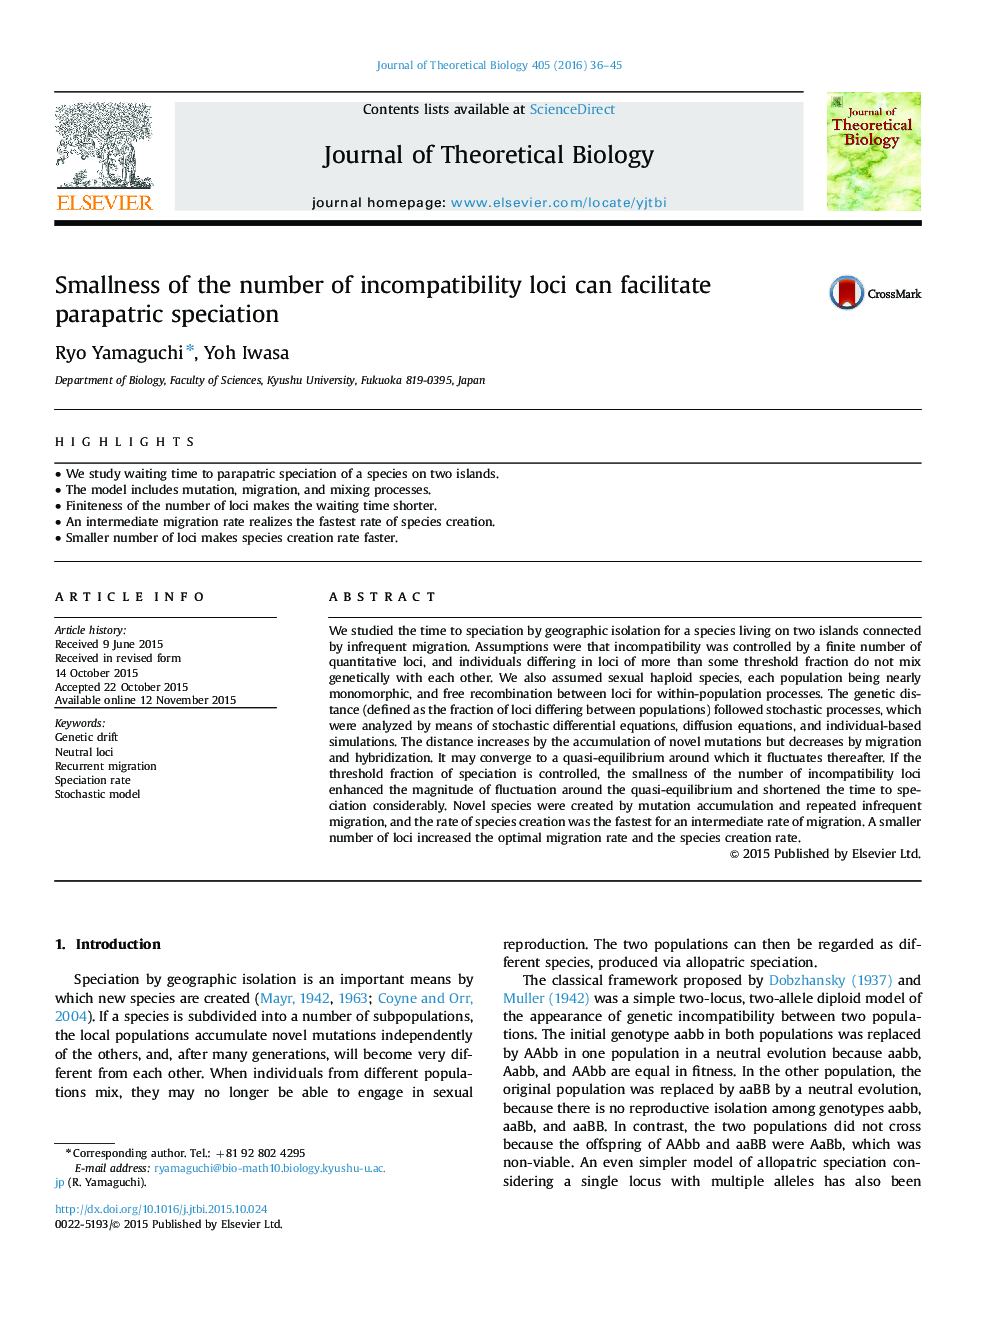 Smallness of the number of incompatibility loci can facilitate parapatric speciation